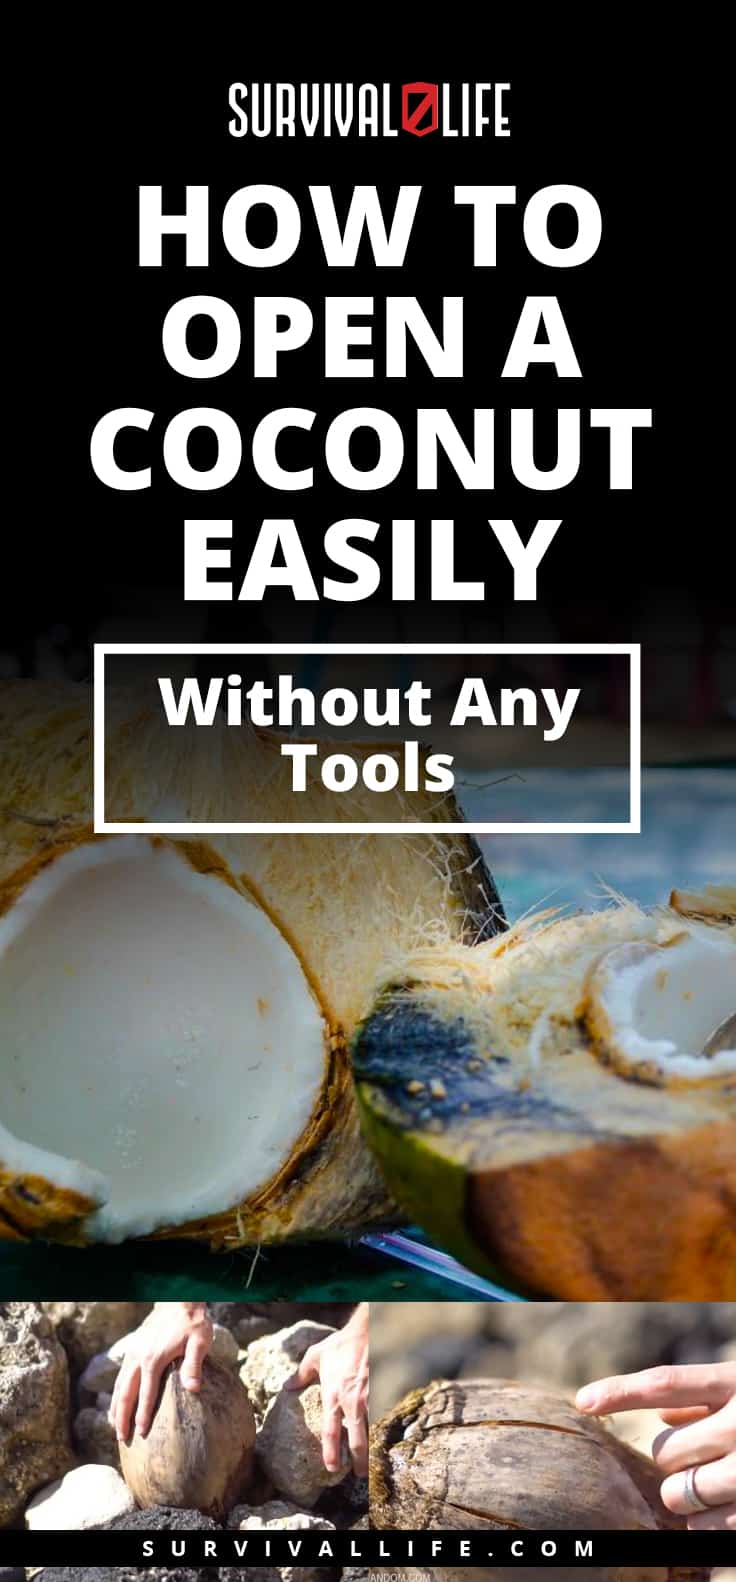 How To Open A Coconut Easily Without Any Tools